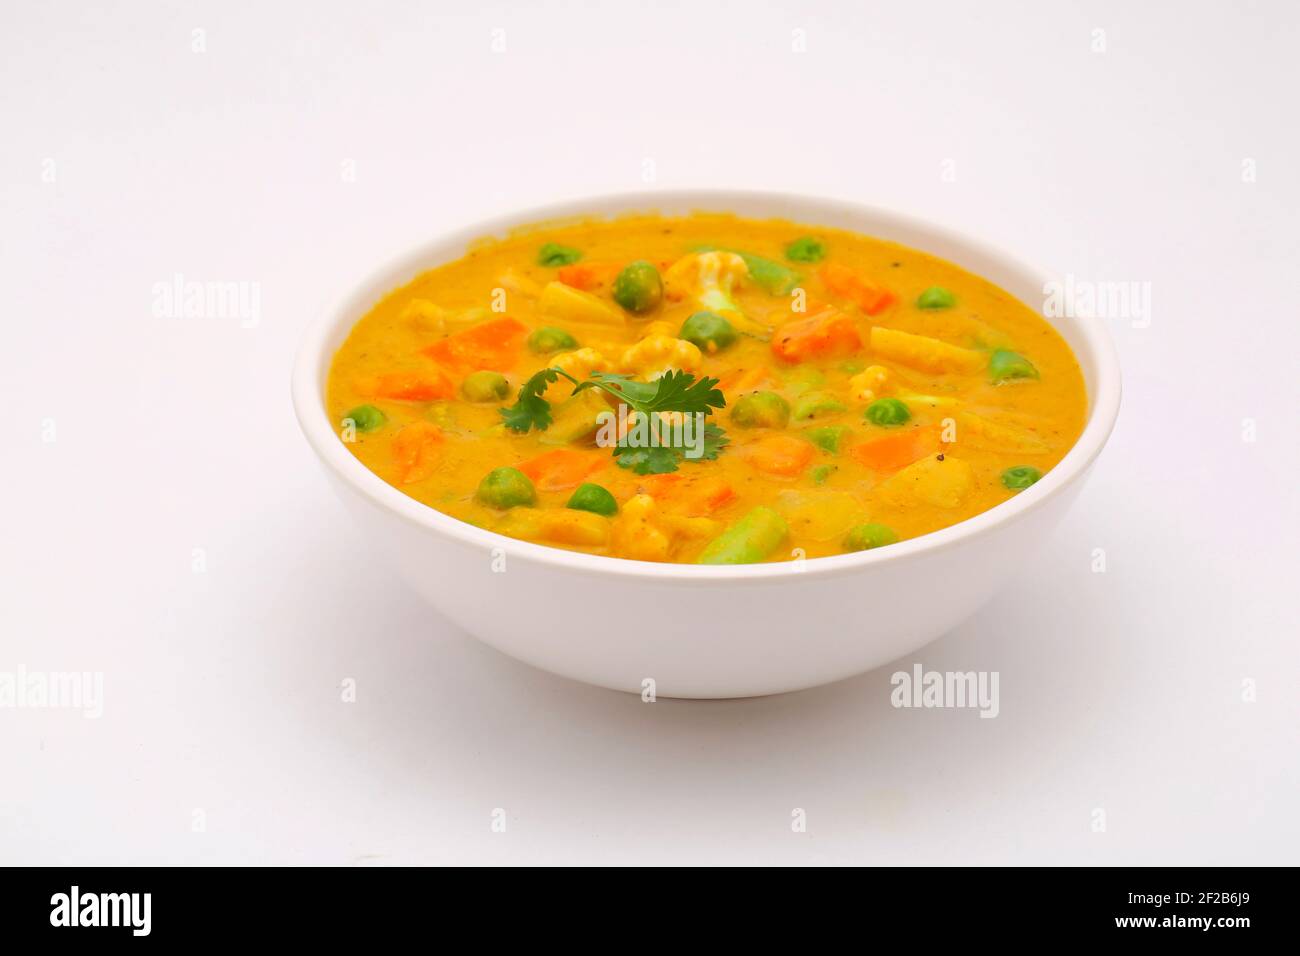 Mixed veg curry or kurma  tasty indian dish made of different vegetables like cauliflower, carrot, potato, green peas and garnished with onion pieces Stock Photo